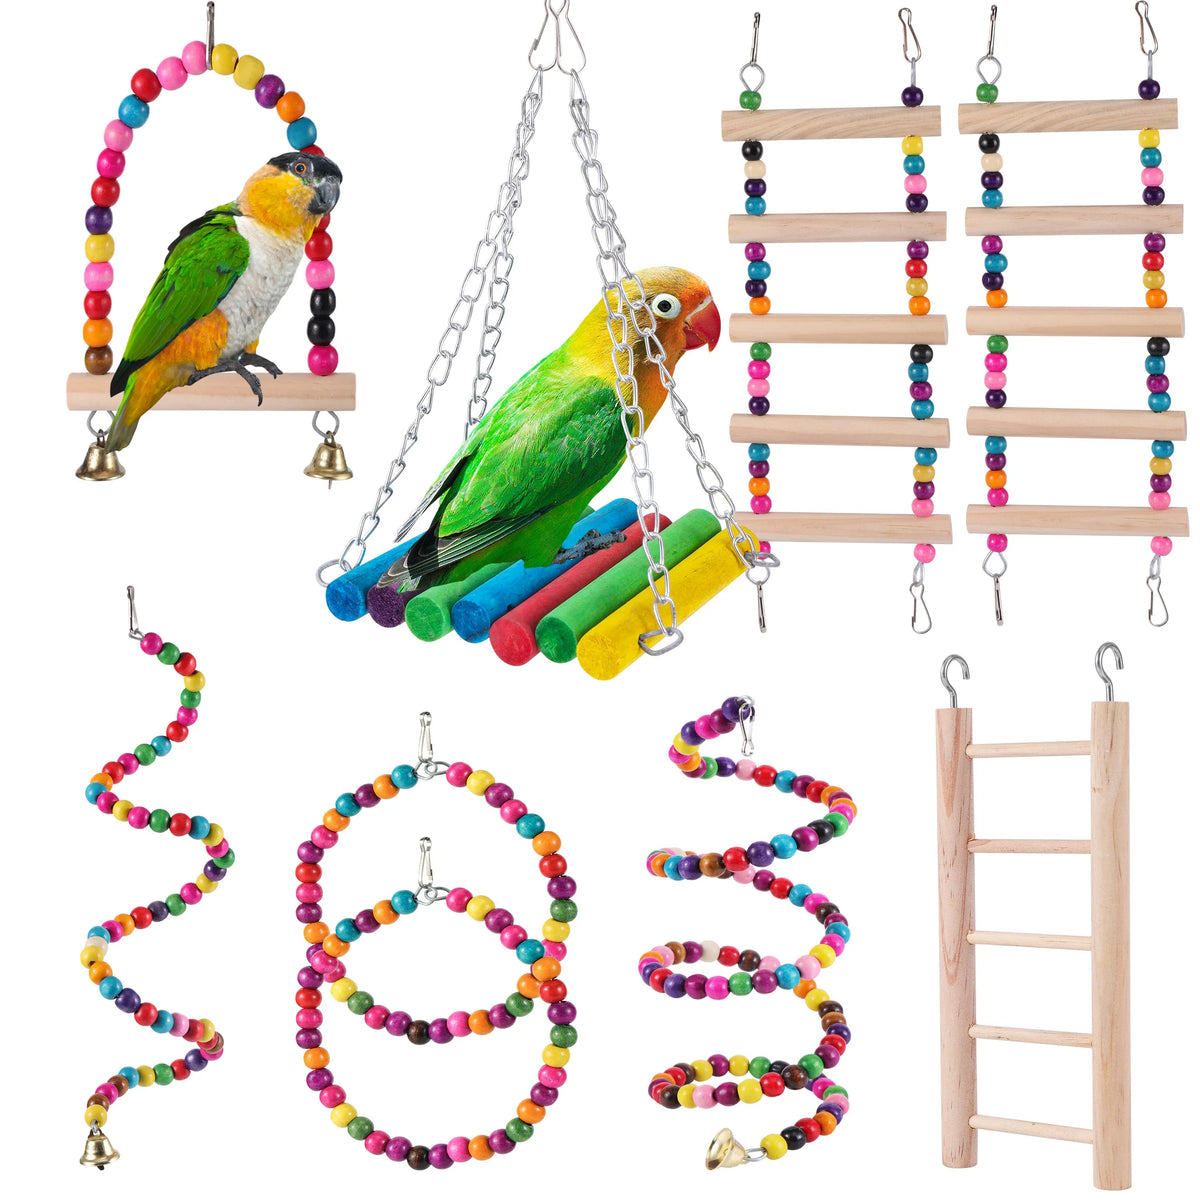 Bird Toys Set Swing Chewing Training Toys Small Parrot Hanging Hammock Parrot Cage Bell Perch Toys with Ladder Pet Supplies 1pc